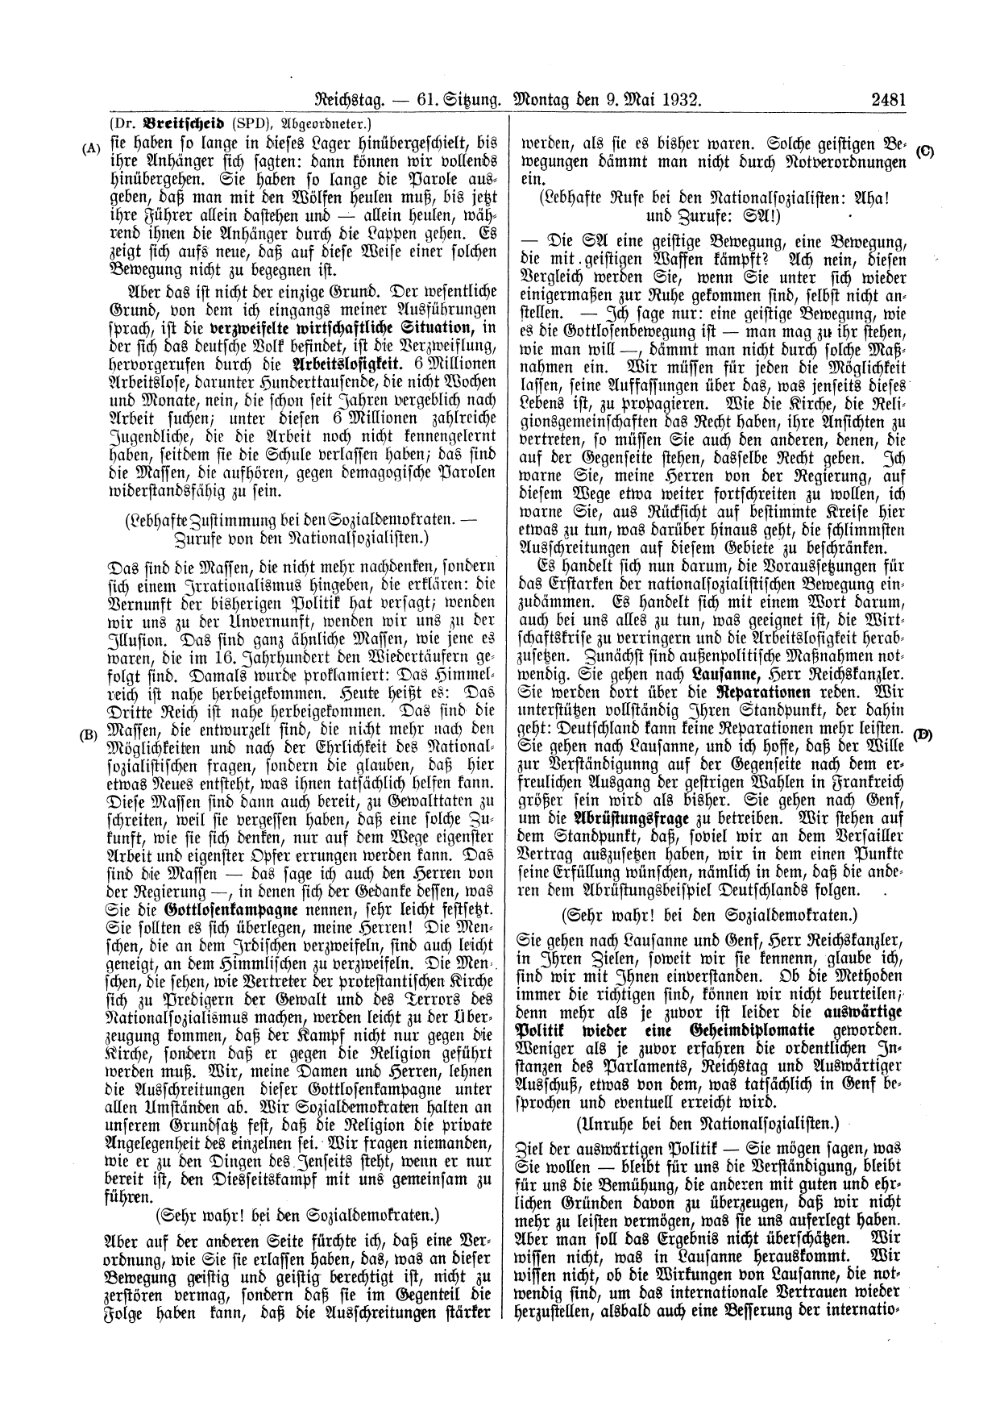 Scan of page 2481